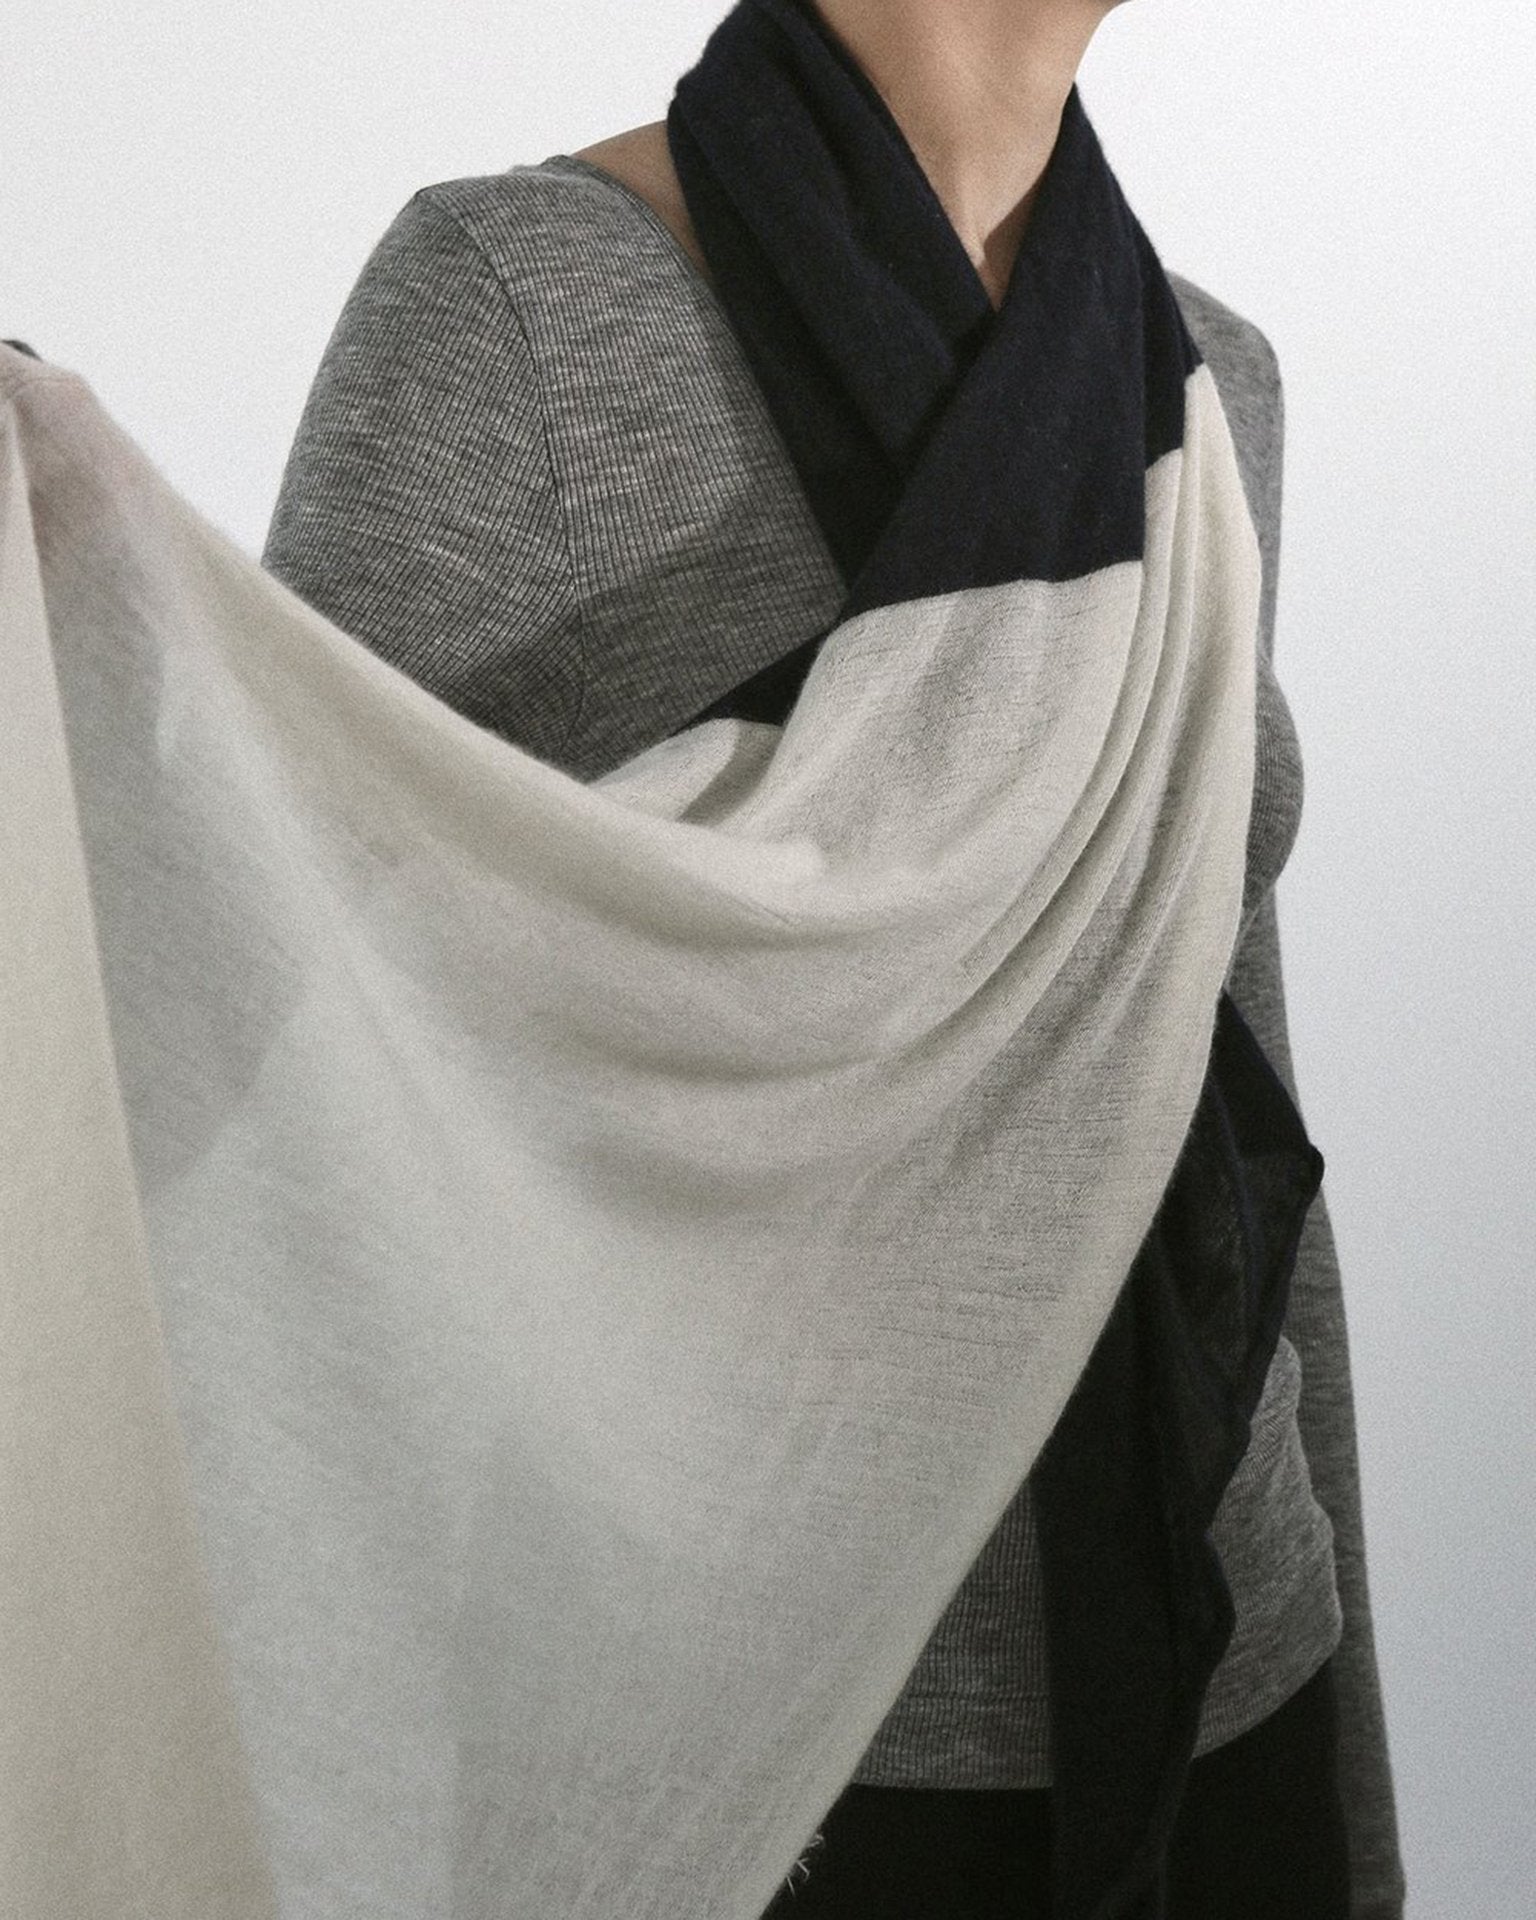 Grisal Love Duo Scarf & Black in Bliss Boutiques Milk Cashmere 